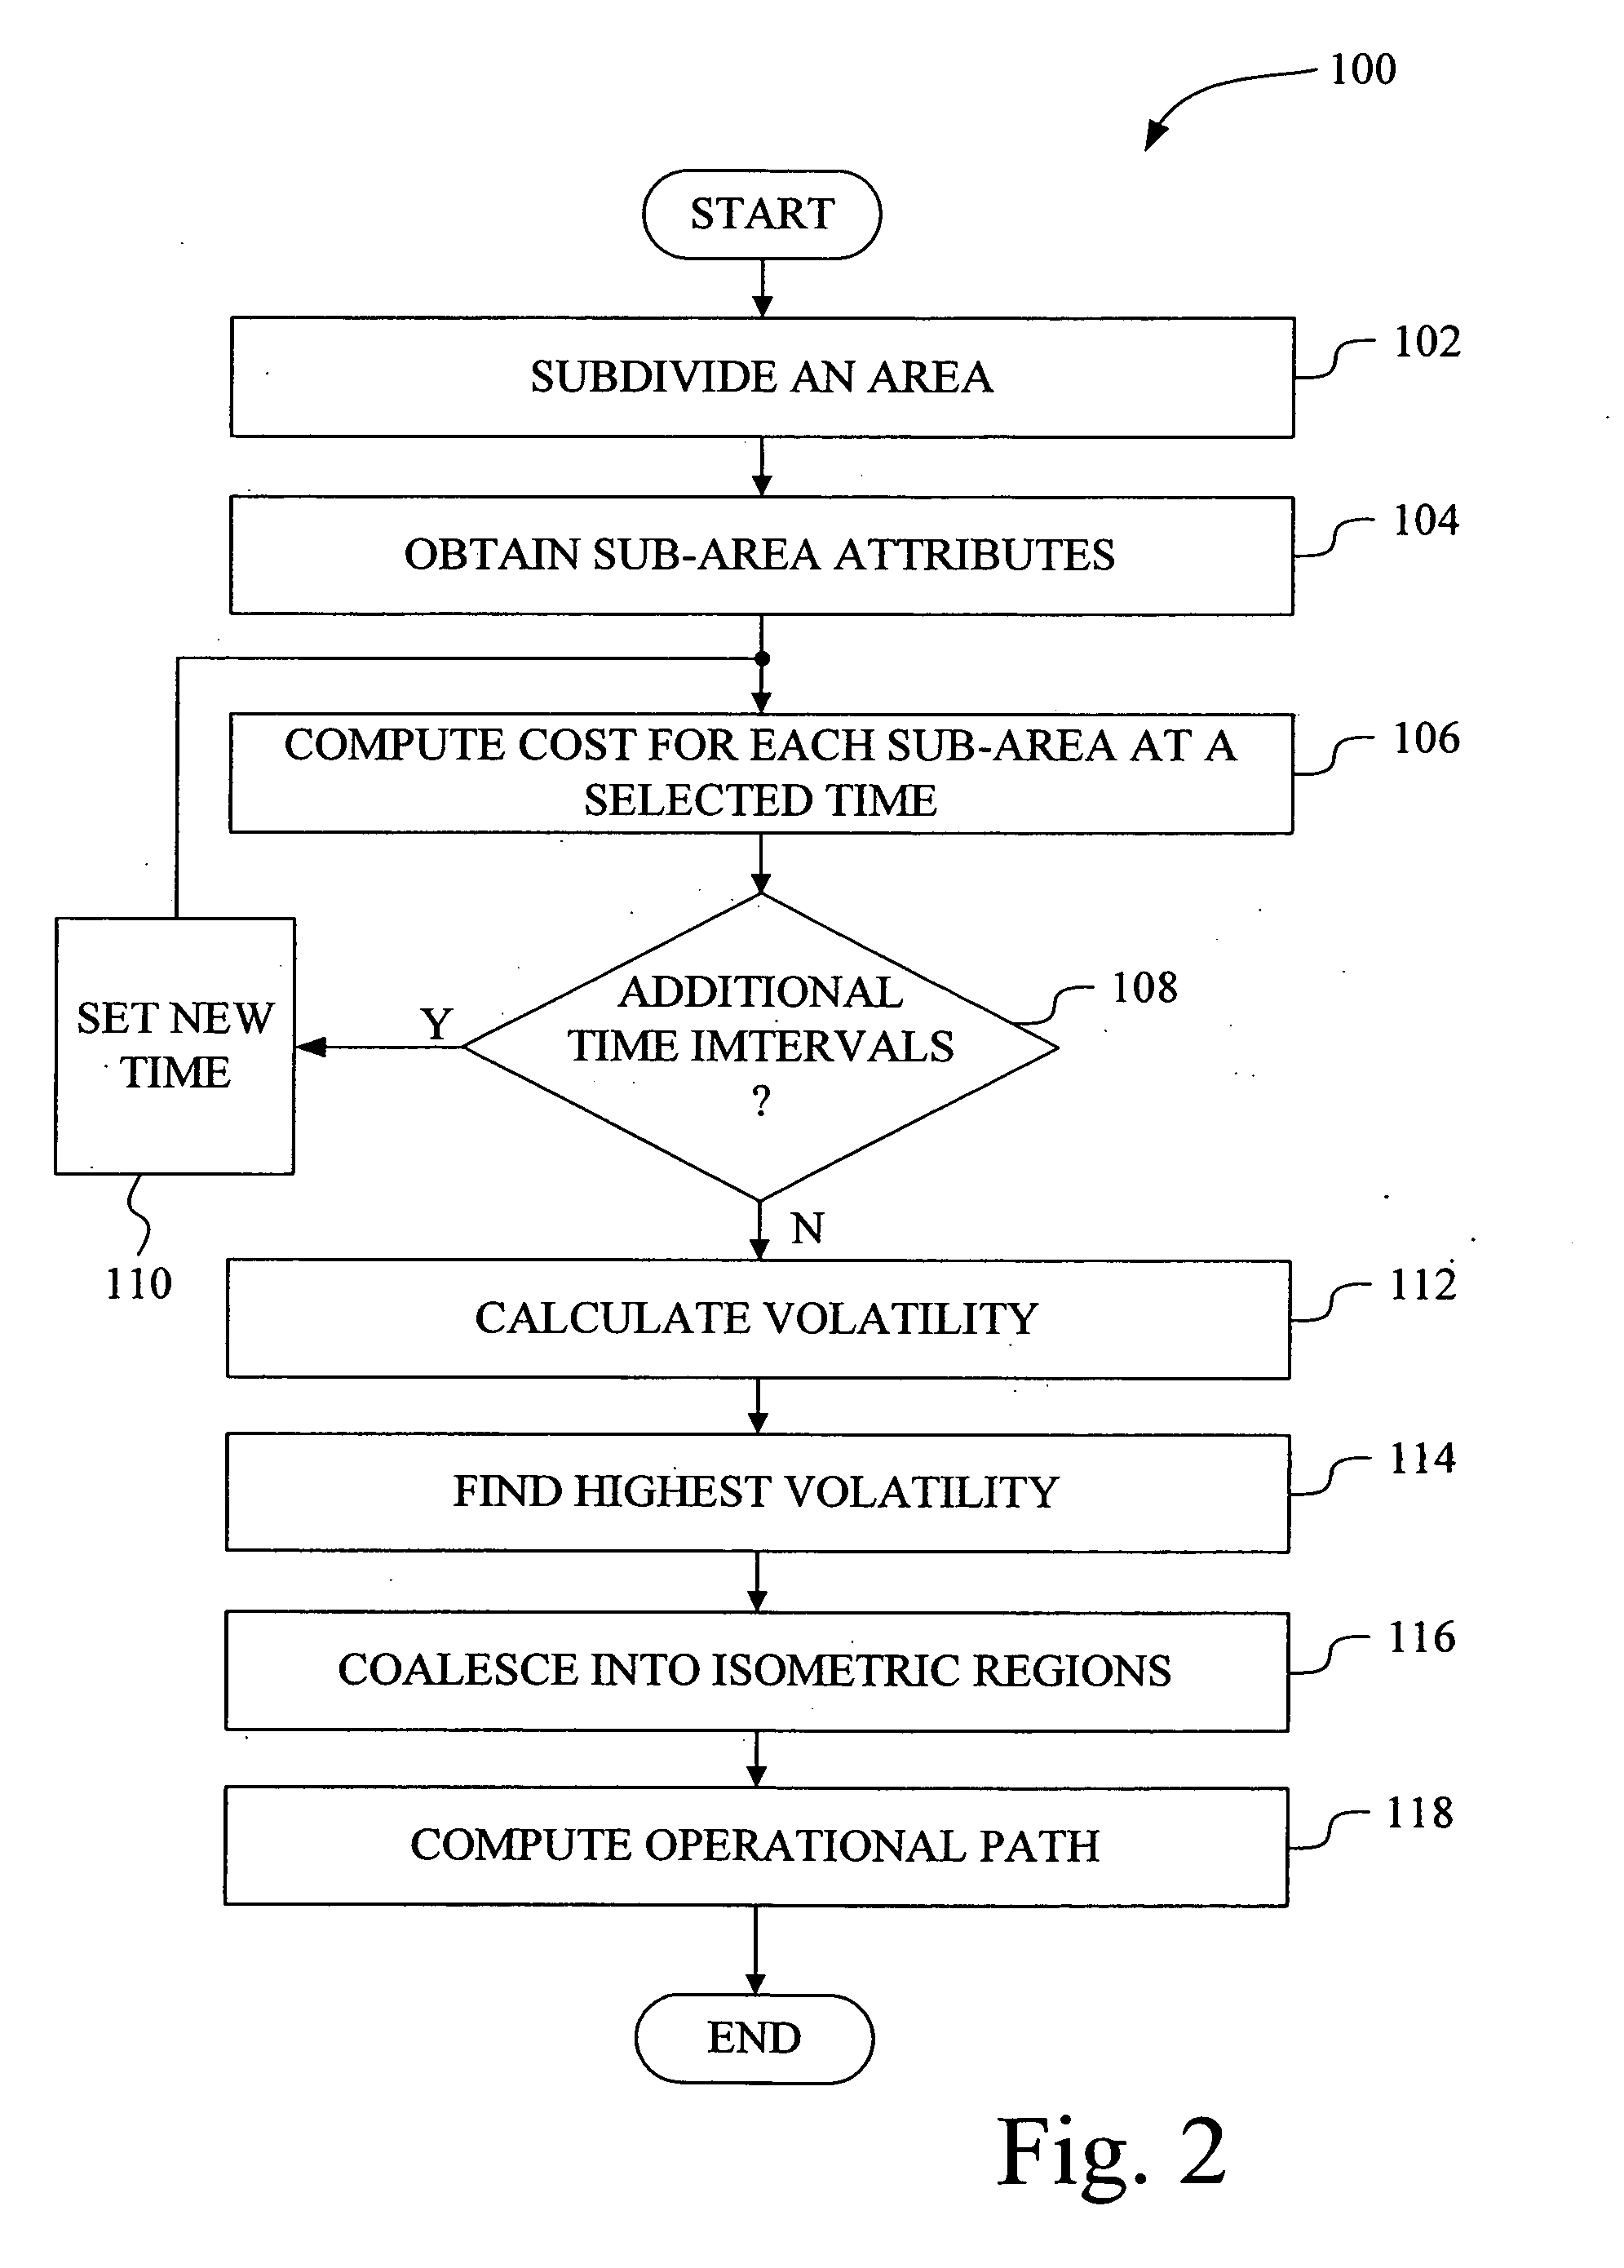 Vehicle area coverage path planning using isometric value regions